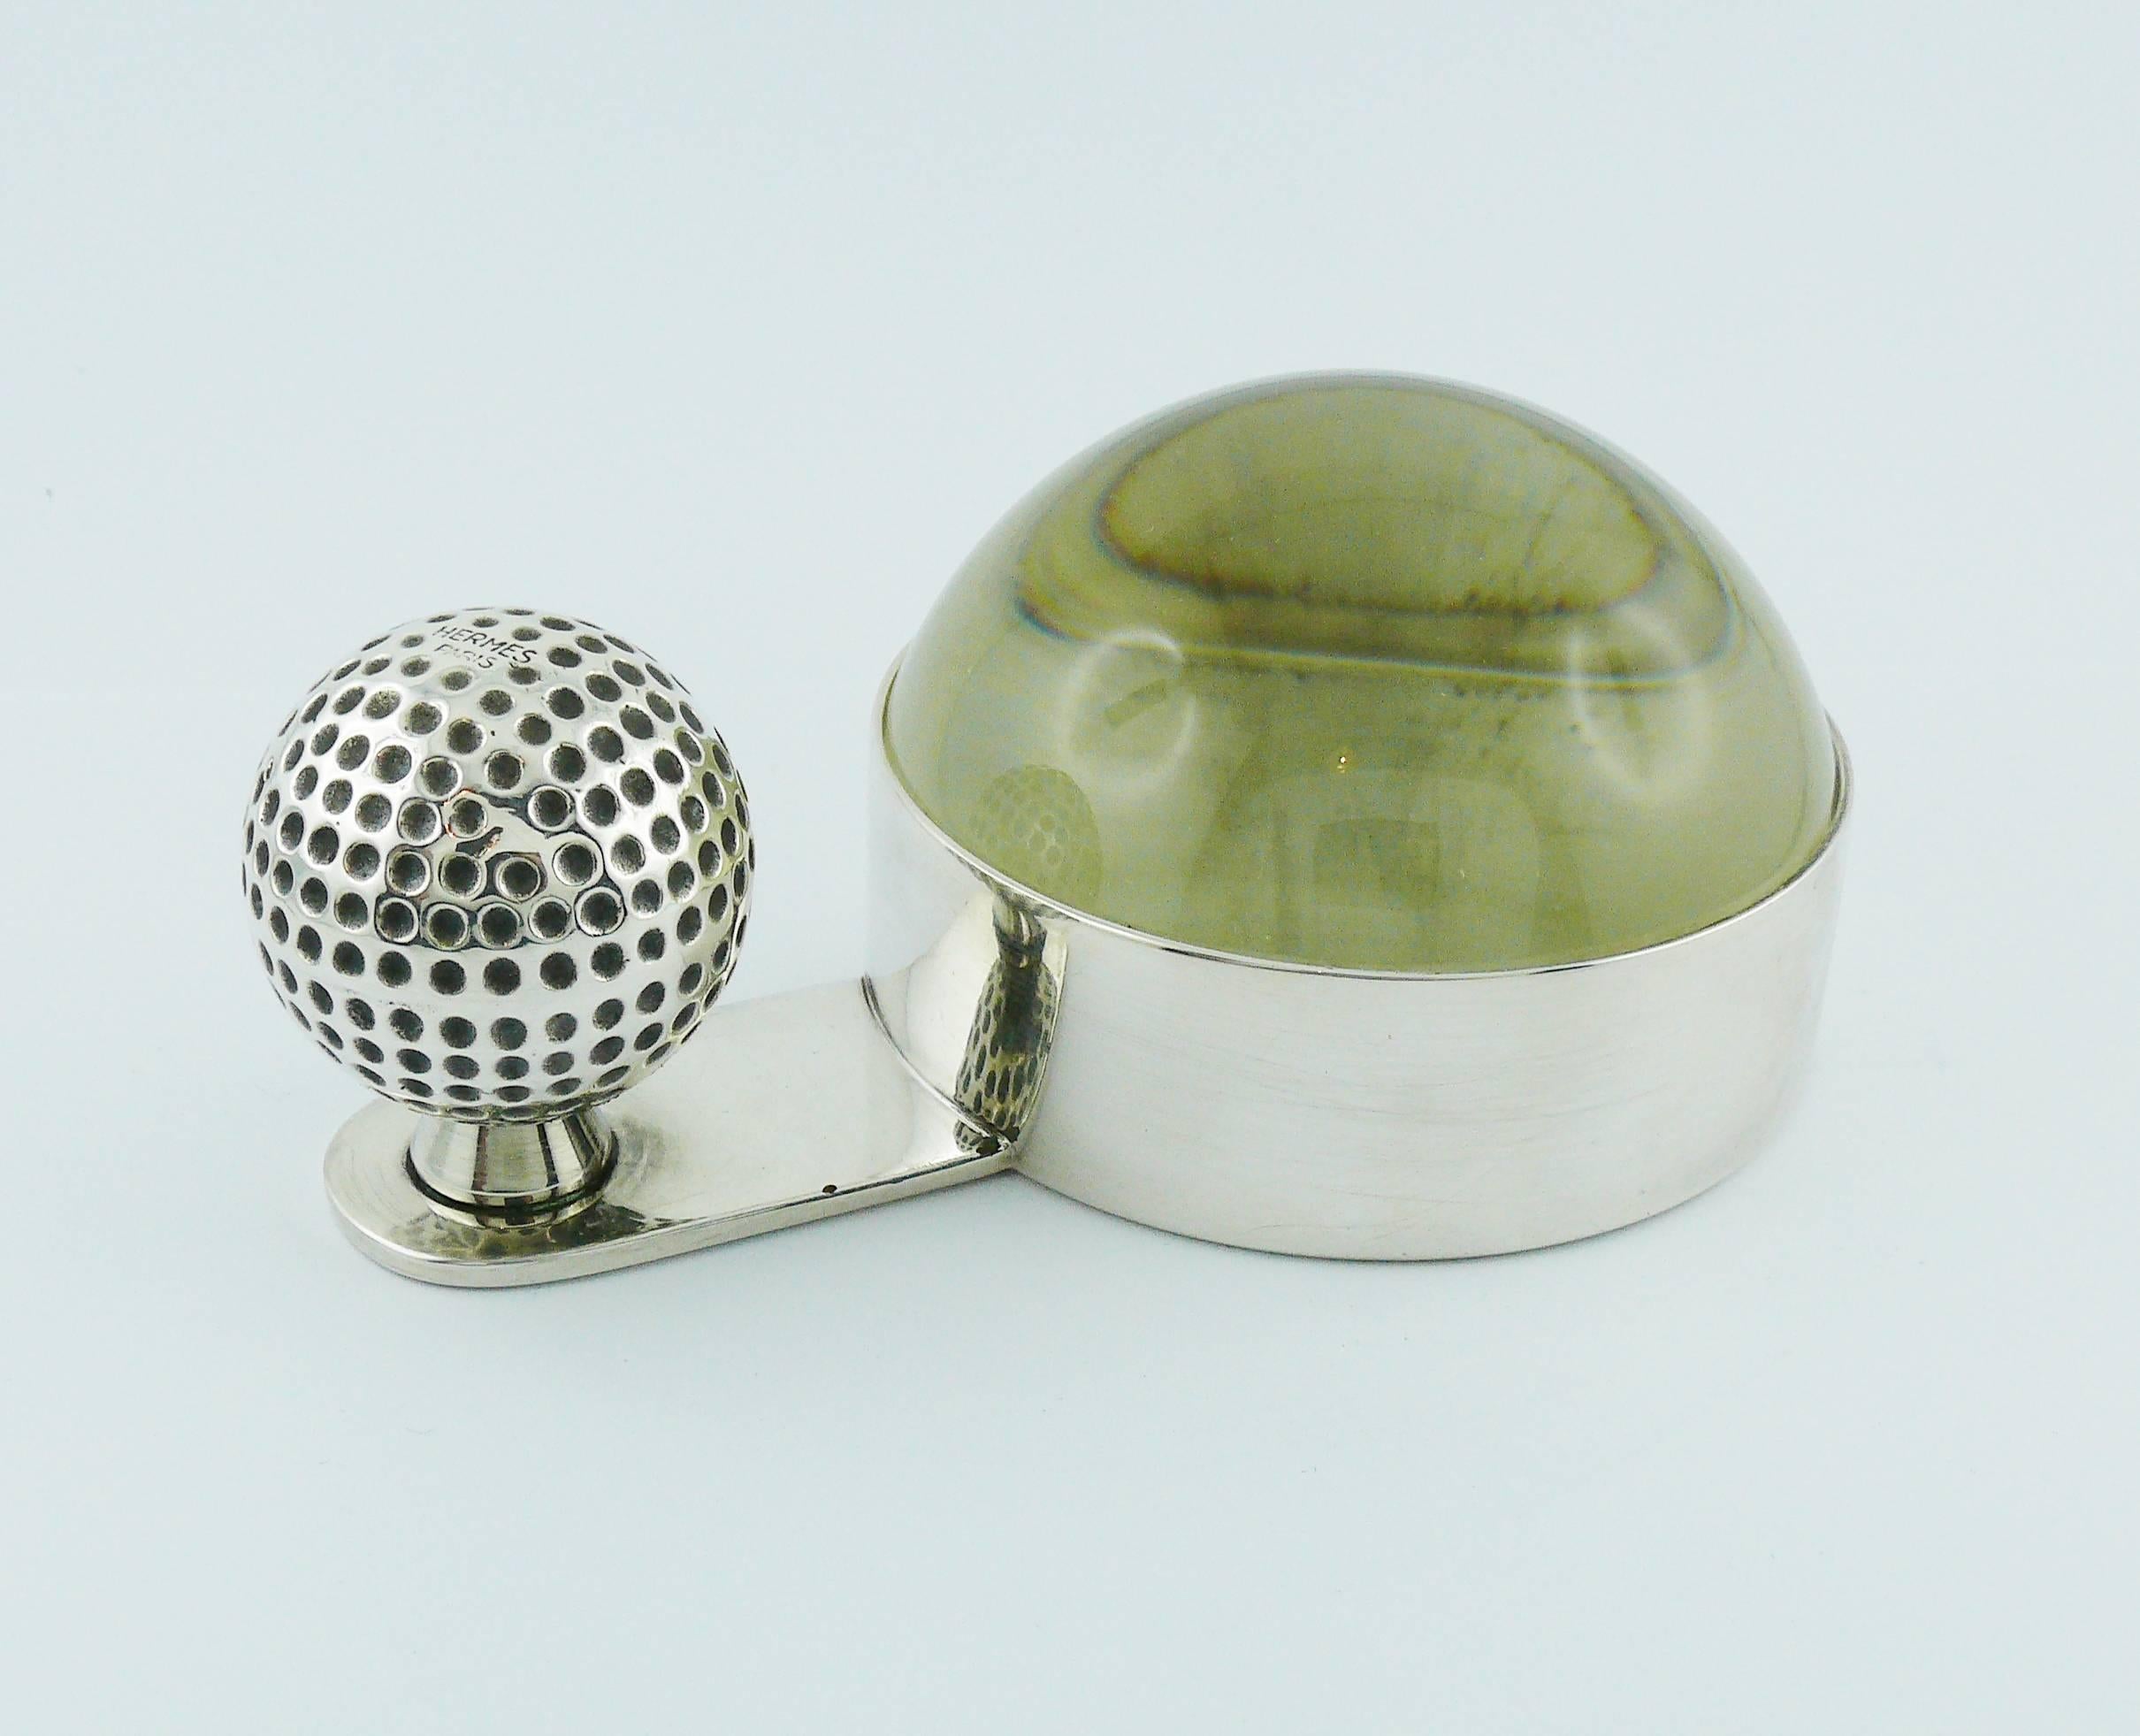 HERMES Paris rare vintage silver plated desk paperweight magnifier featuring a golf ball.

Embossed HERMES Paris Made in France.
Maker's hallmark.

IMPORTANT INFORMATION : Please note that the glass insert is removable (shown on photo